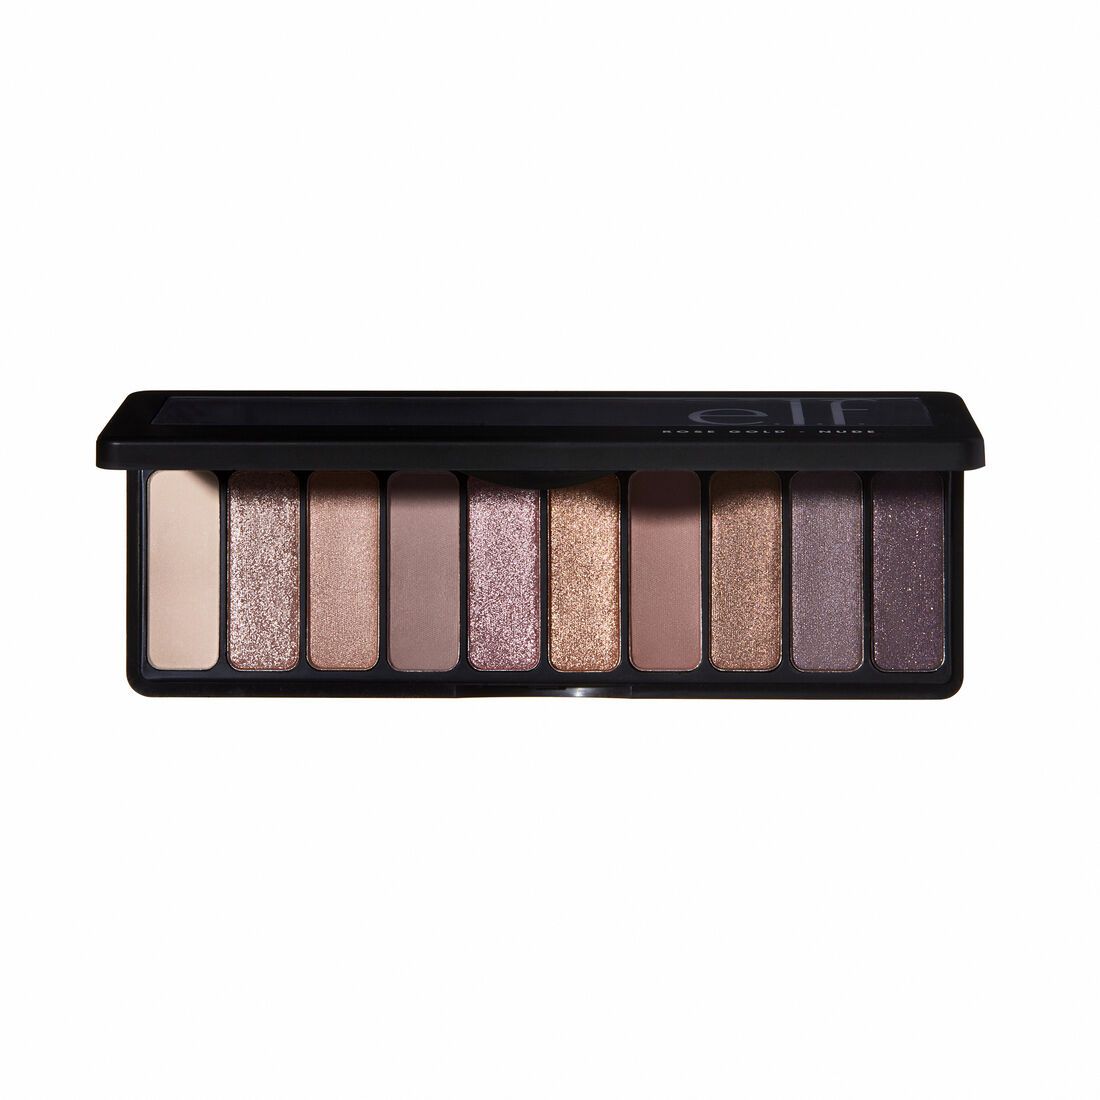 Rose Gold Eyeshadow Palette - Nude Rose Gold | e.l.f. cosmetics (US)